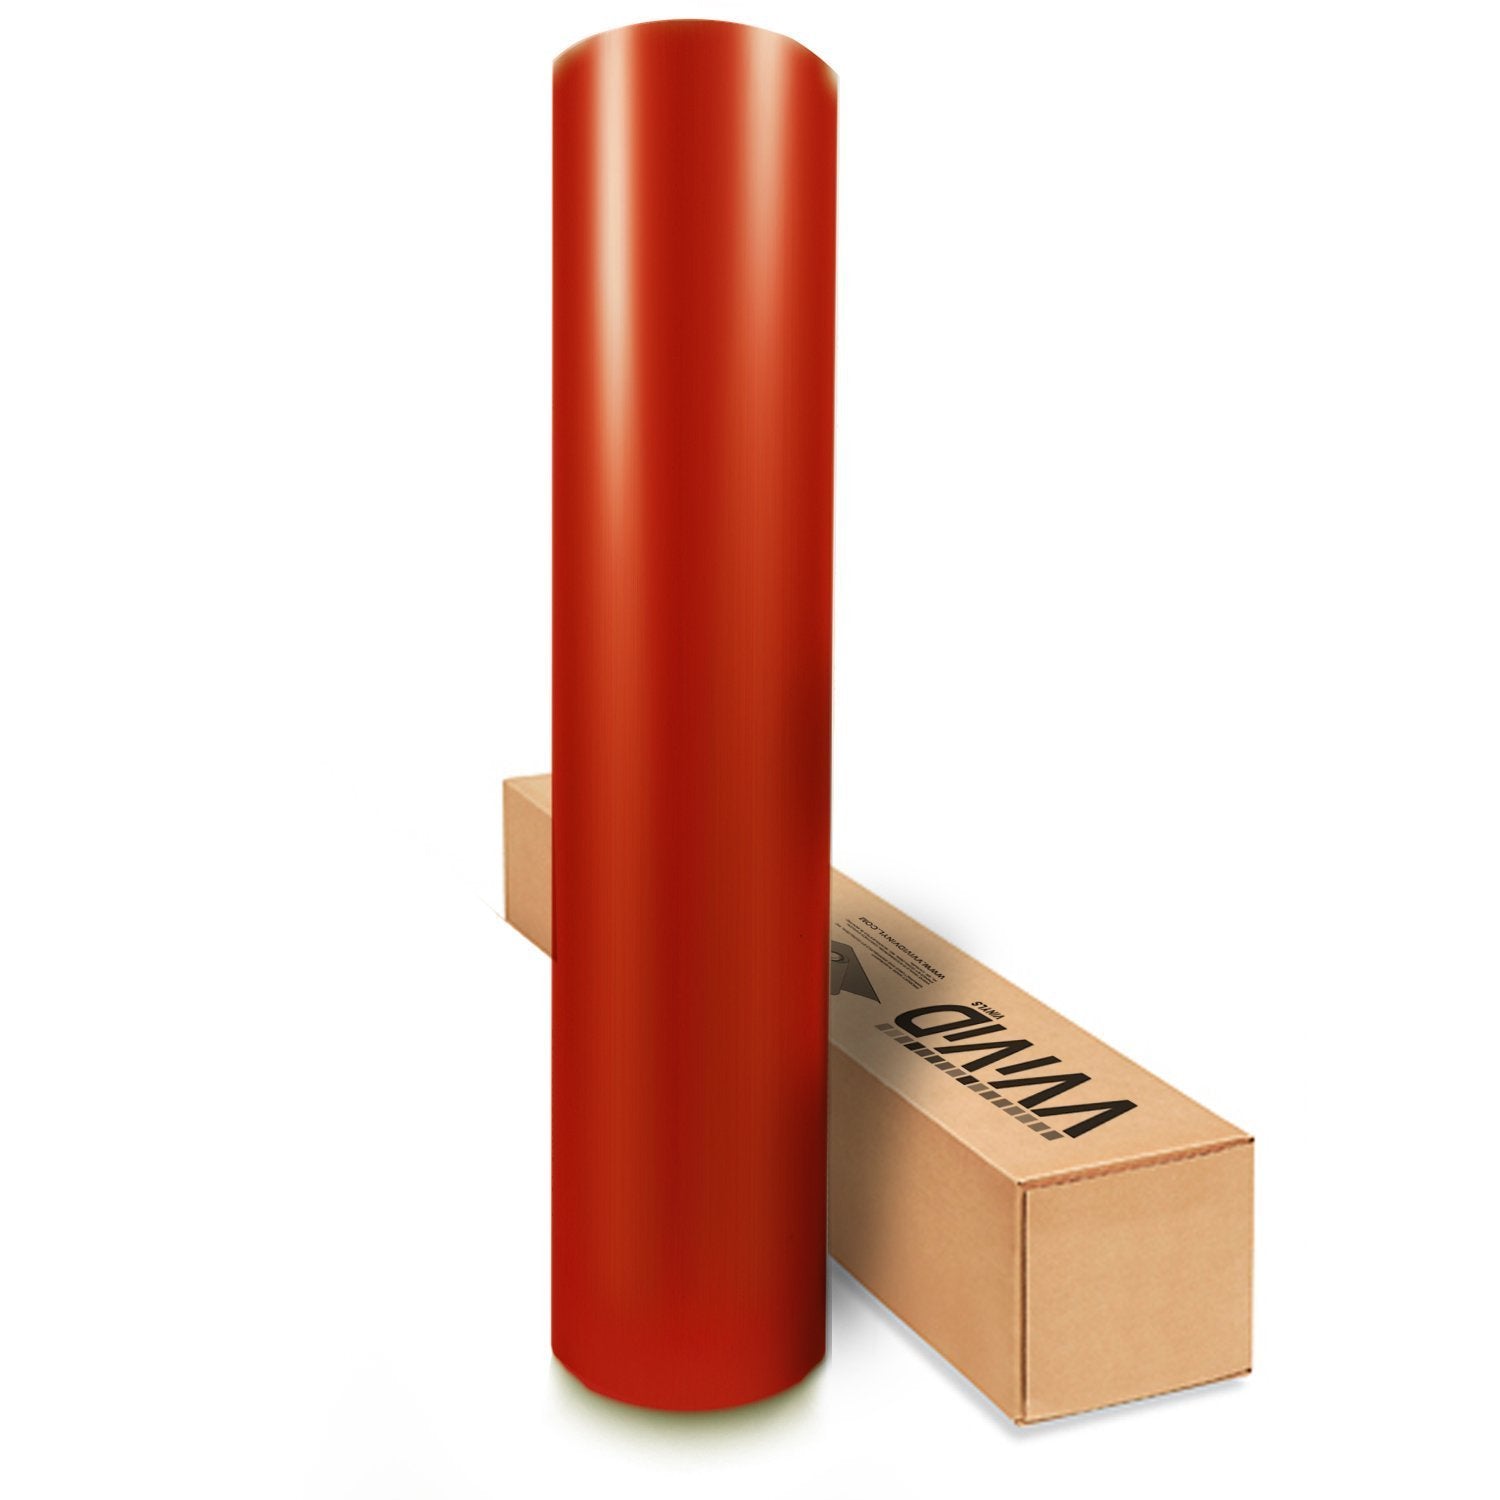 VViViD XPO Matte Blood Red Vinyl Wrap Roll with Air Release Technology - 6ft x 5ft